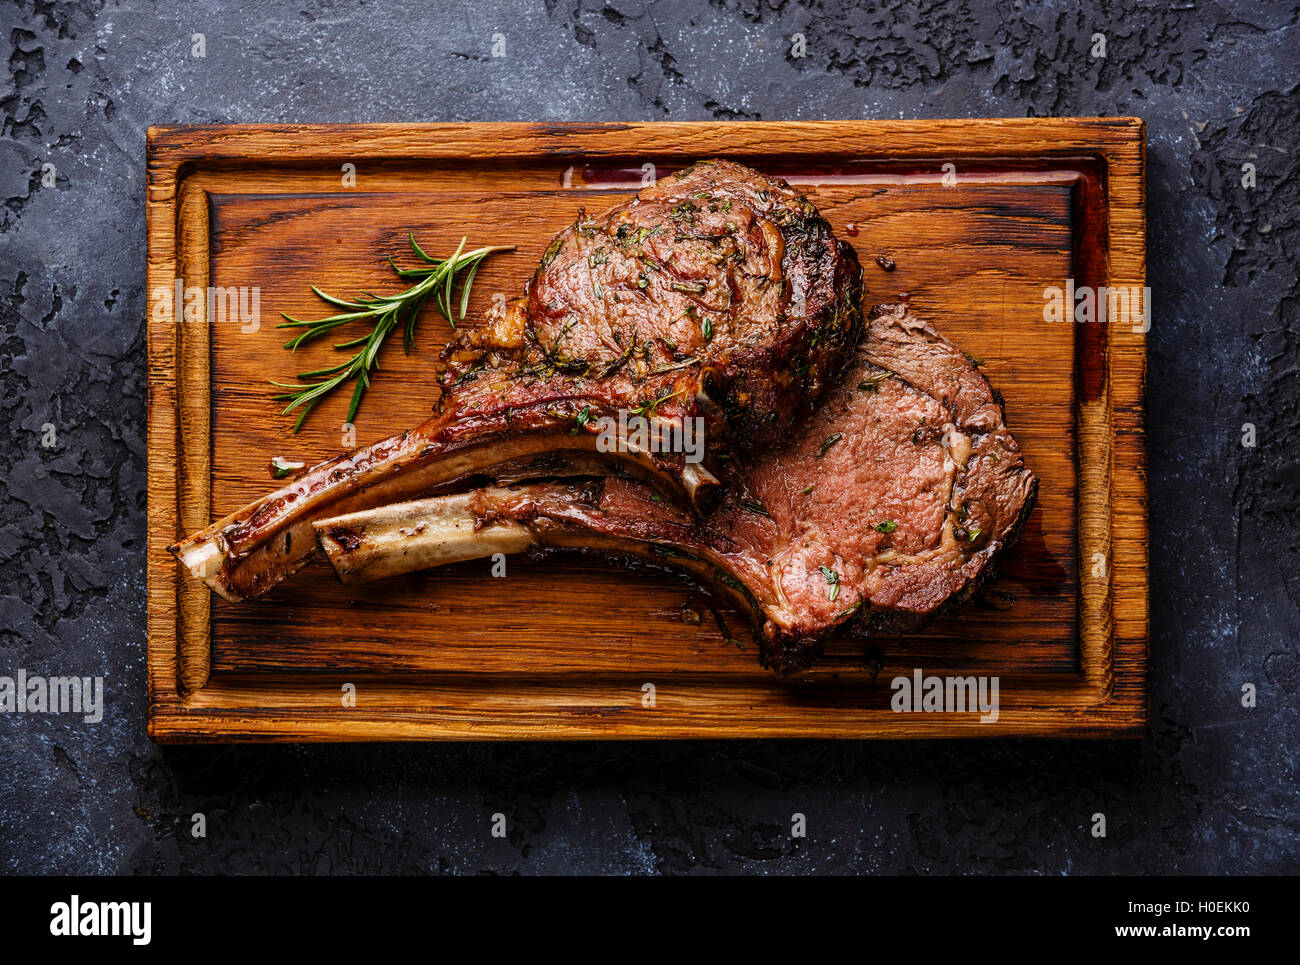 Roasted beef ribs on bone on wooden cutting board on dark background Stock Photo